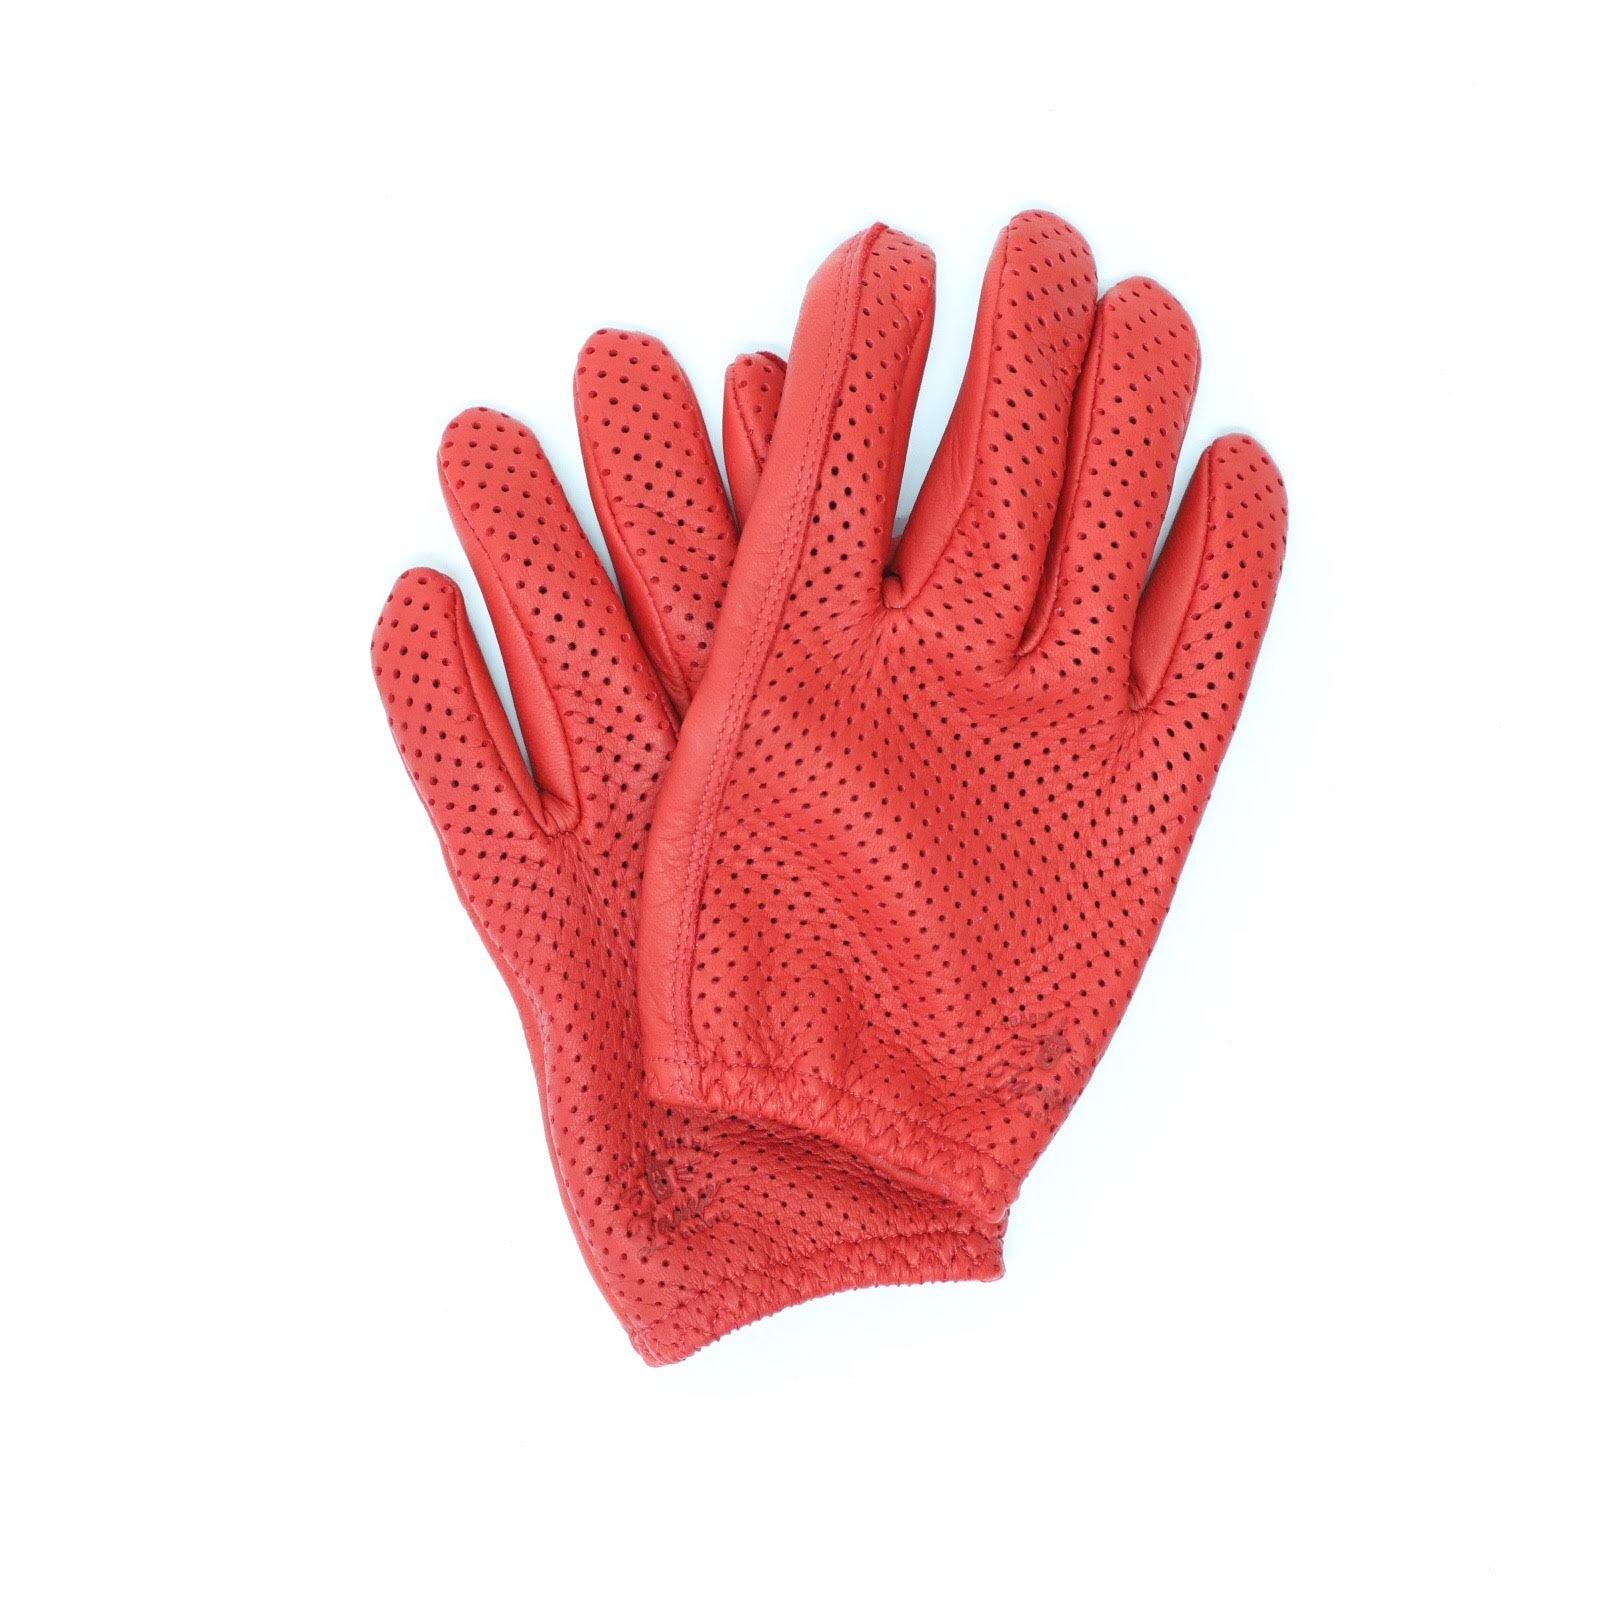 Lamp gloves -Punching glove- Red – anemoscope